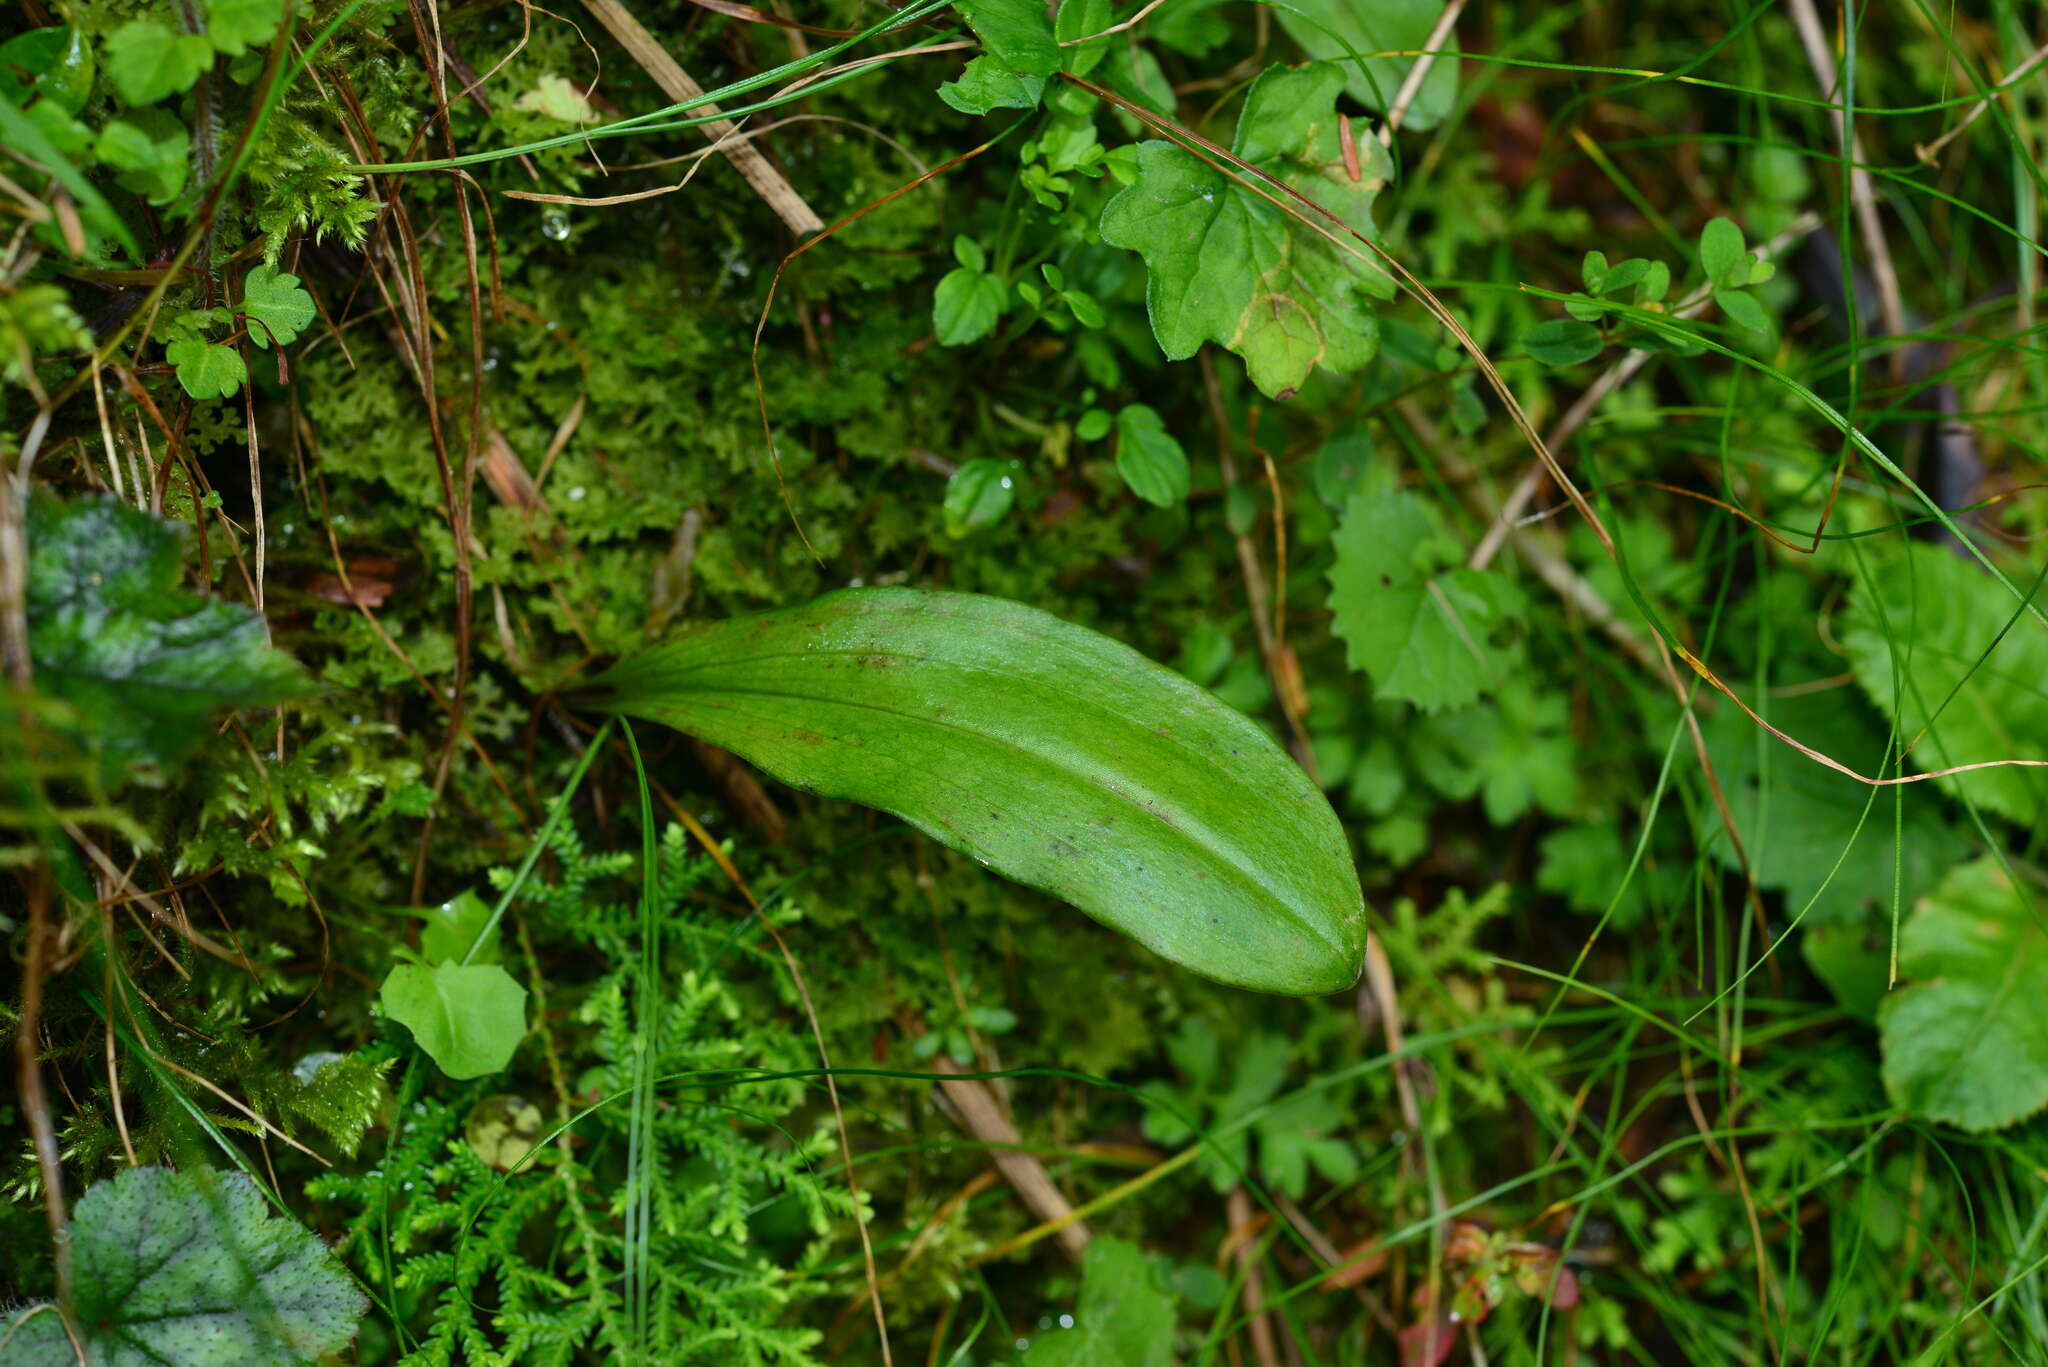 Image of Platanthera taiwanensis (S. S. Ying) S. C. Chen, S. W. Gale & P. J. Cribb